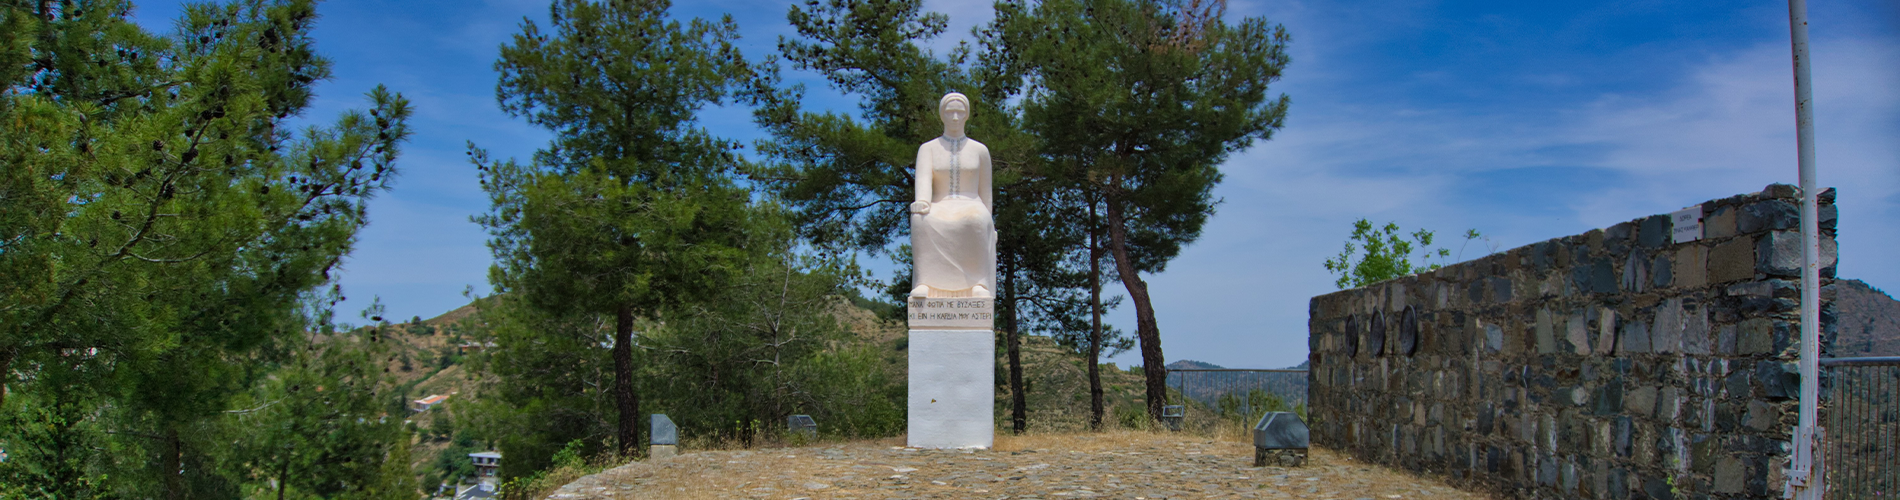 Monument of the Cypriot Mother